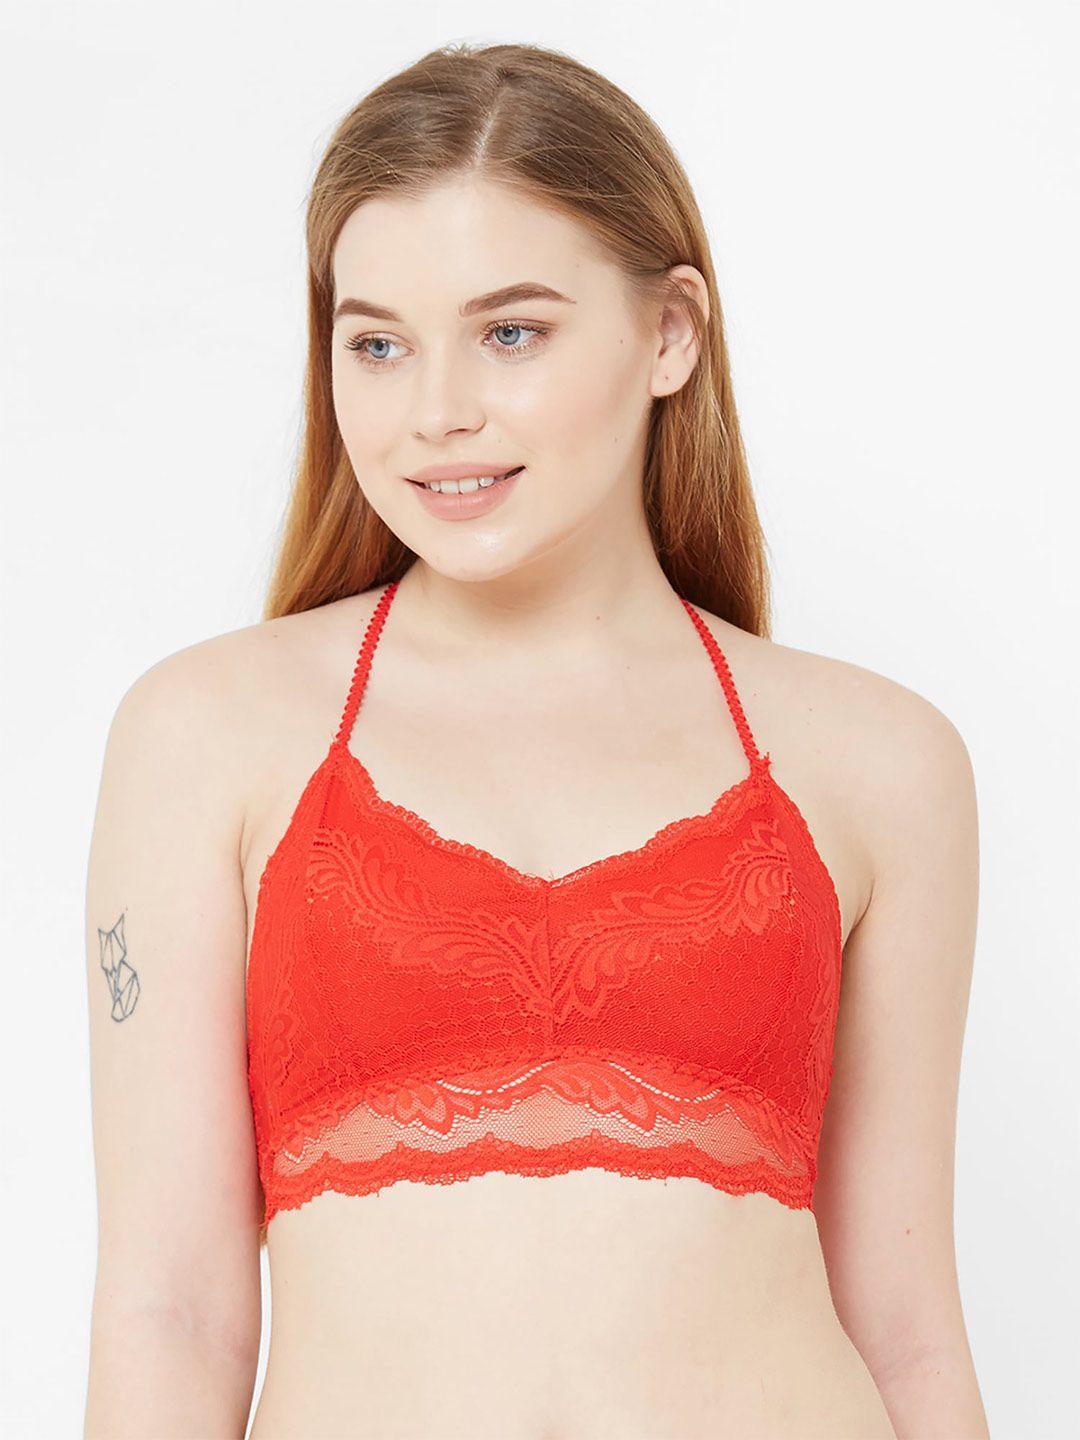 noira-floral-laced-full-coverage-removable-padding-bralette-bra-with-all-day-comfort